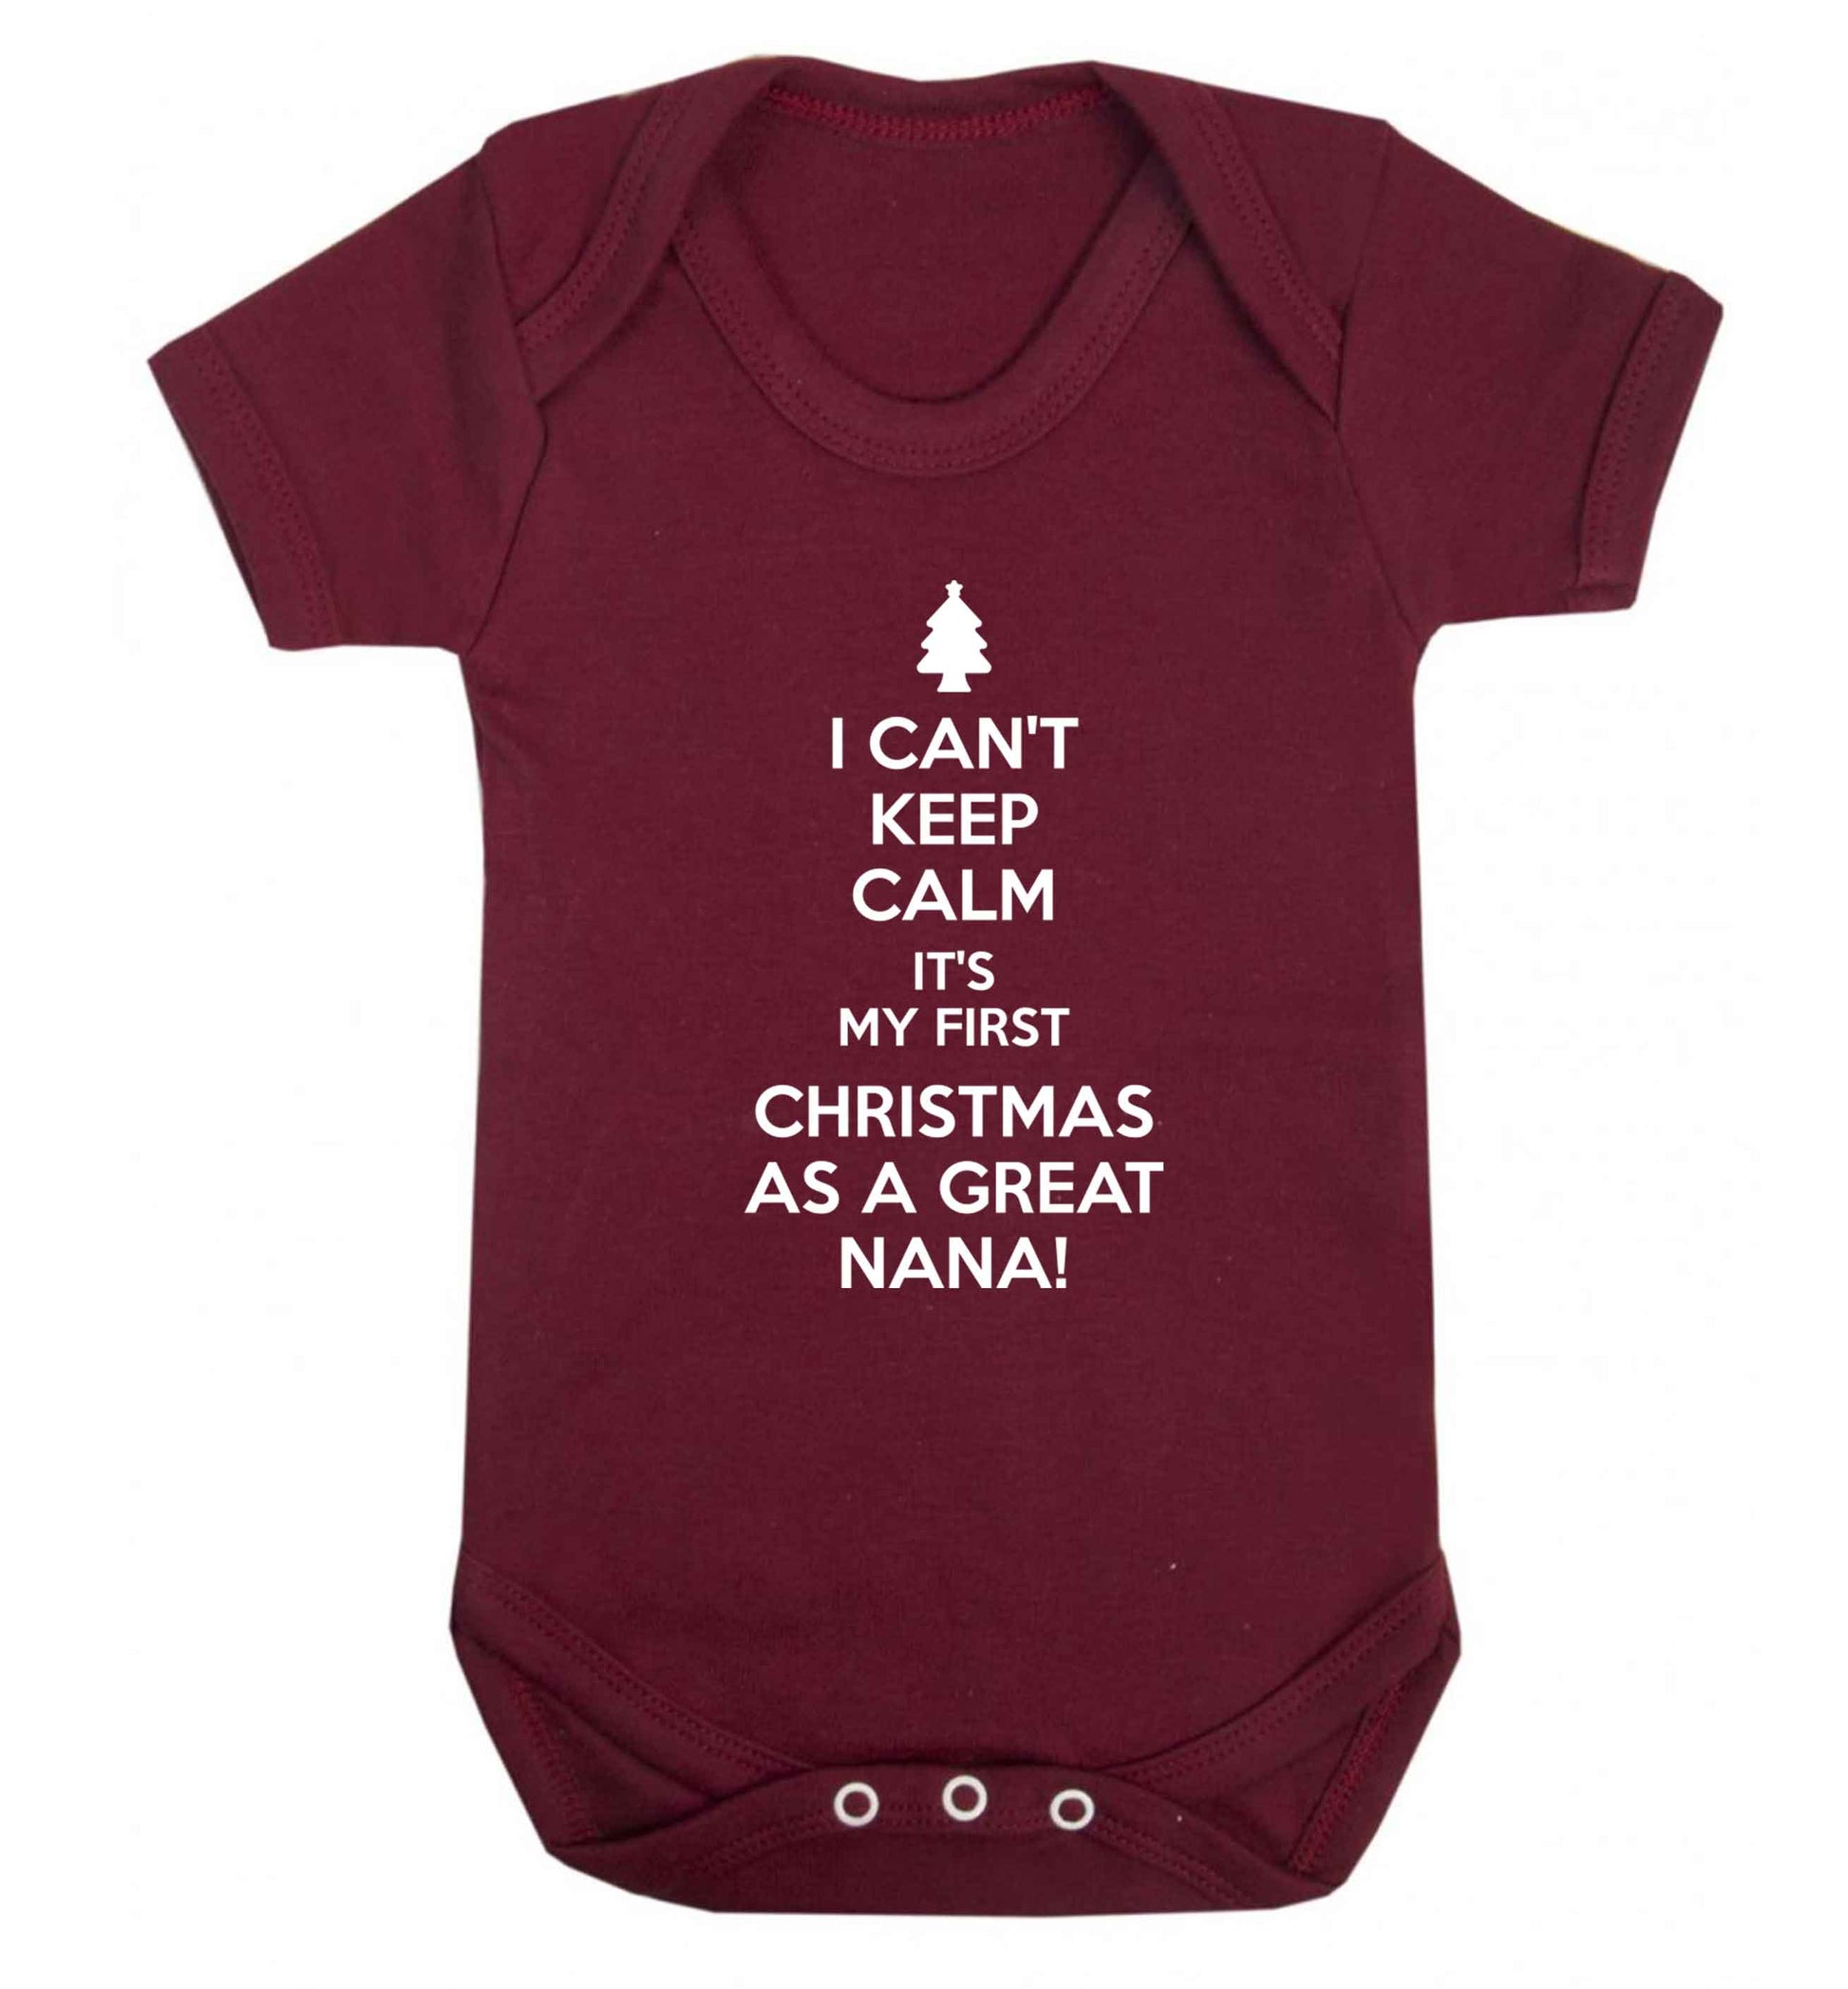 I can't keep calm it's my first Christmas as a great nana! Baby Vest maroon 18-24 months